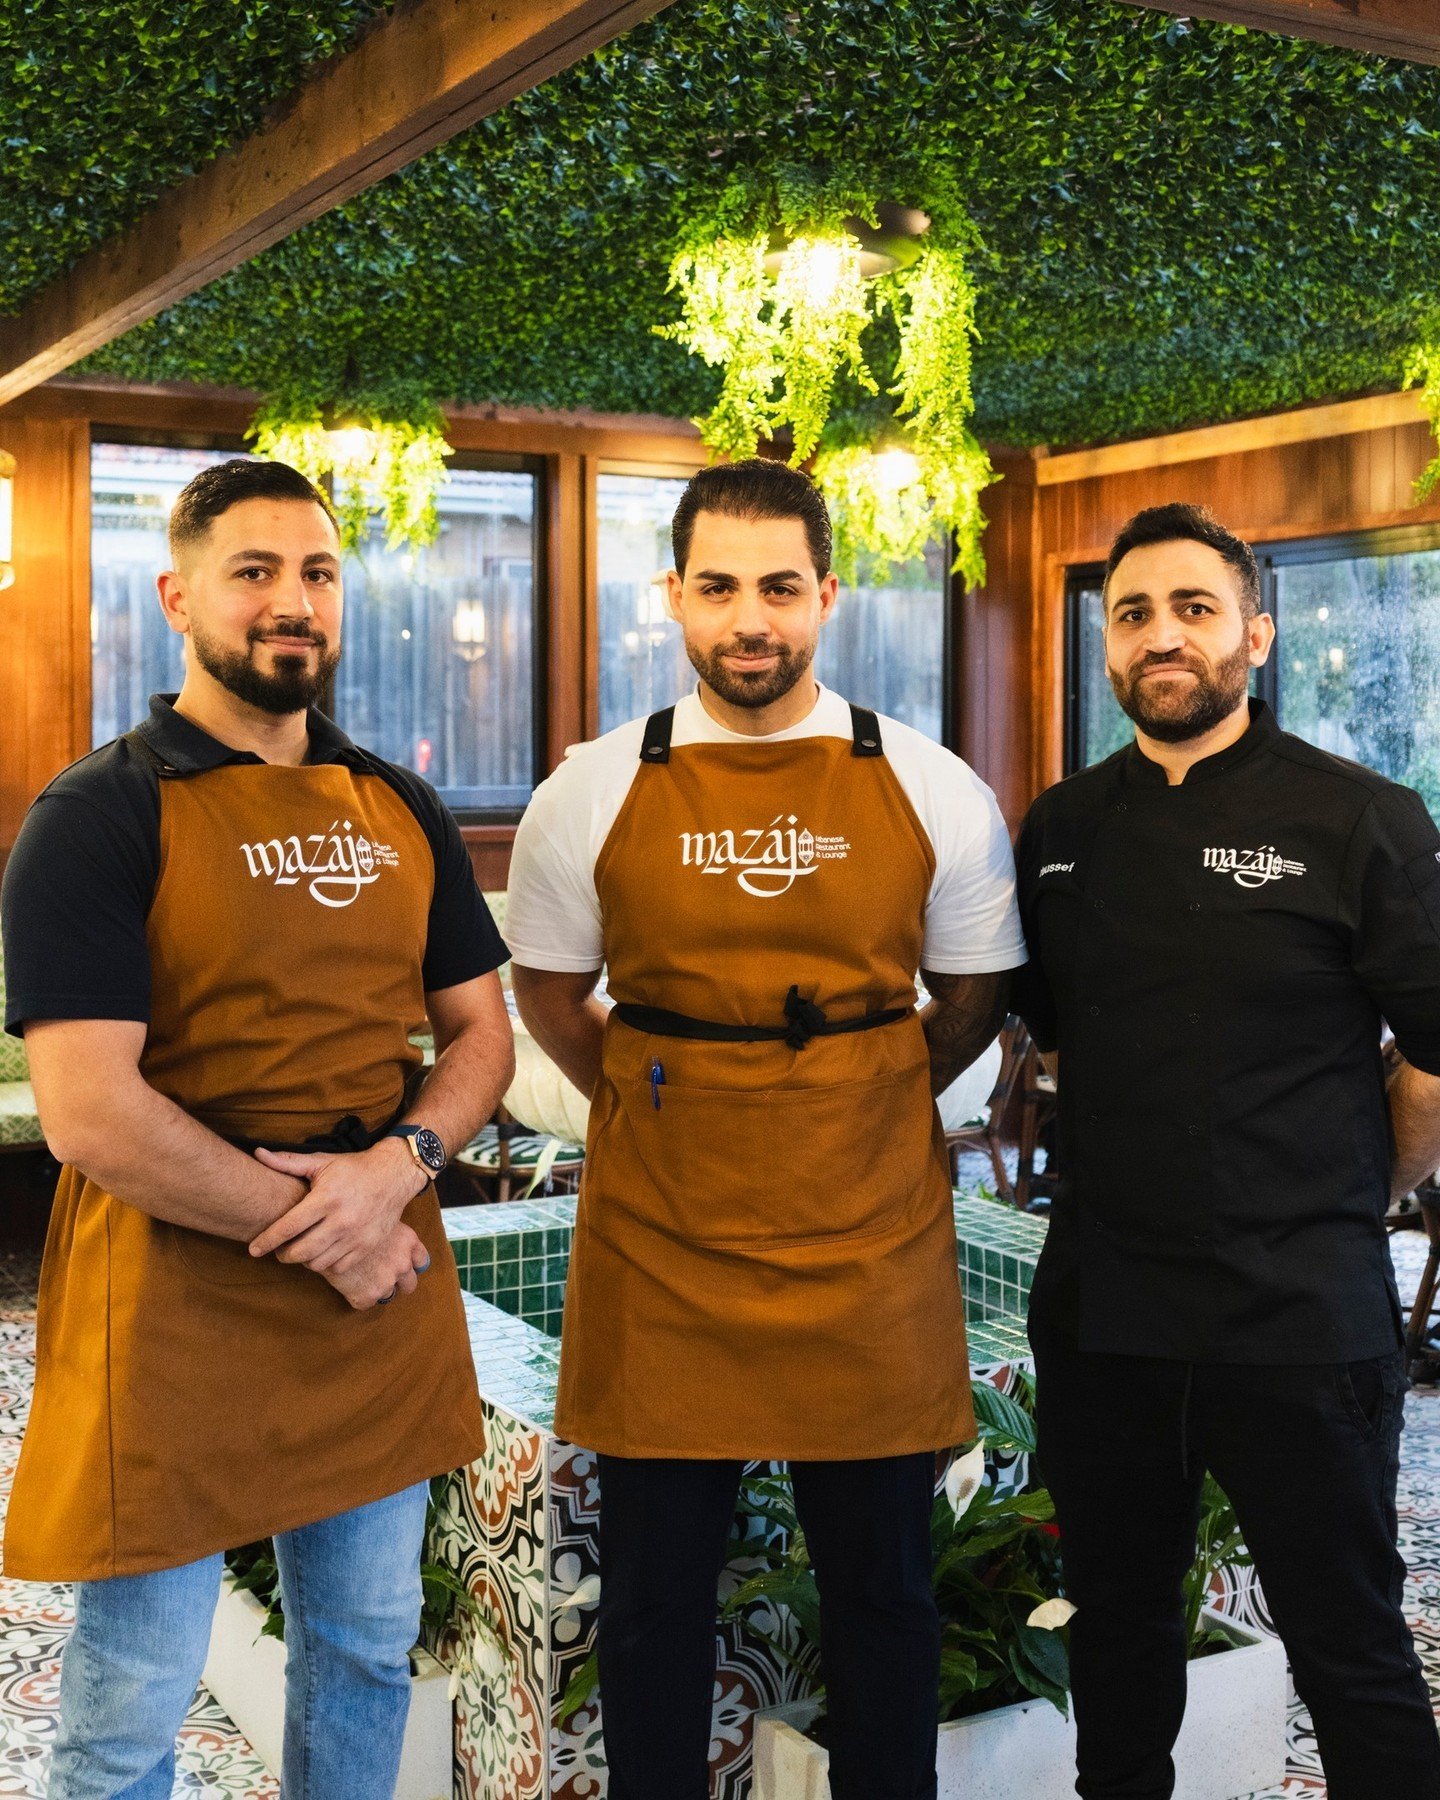 Bringing Lebanon to Melbourne: Two Lebanese brothers, fuelled by a shared dream and a passion for their culinary heritage, created Mazaj to bring the vibrant flavours of Lebanon to Melbourne. Alongside the most talented Lebanese chef, they crafted di